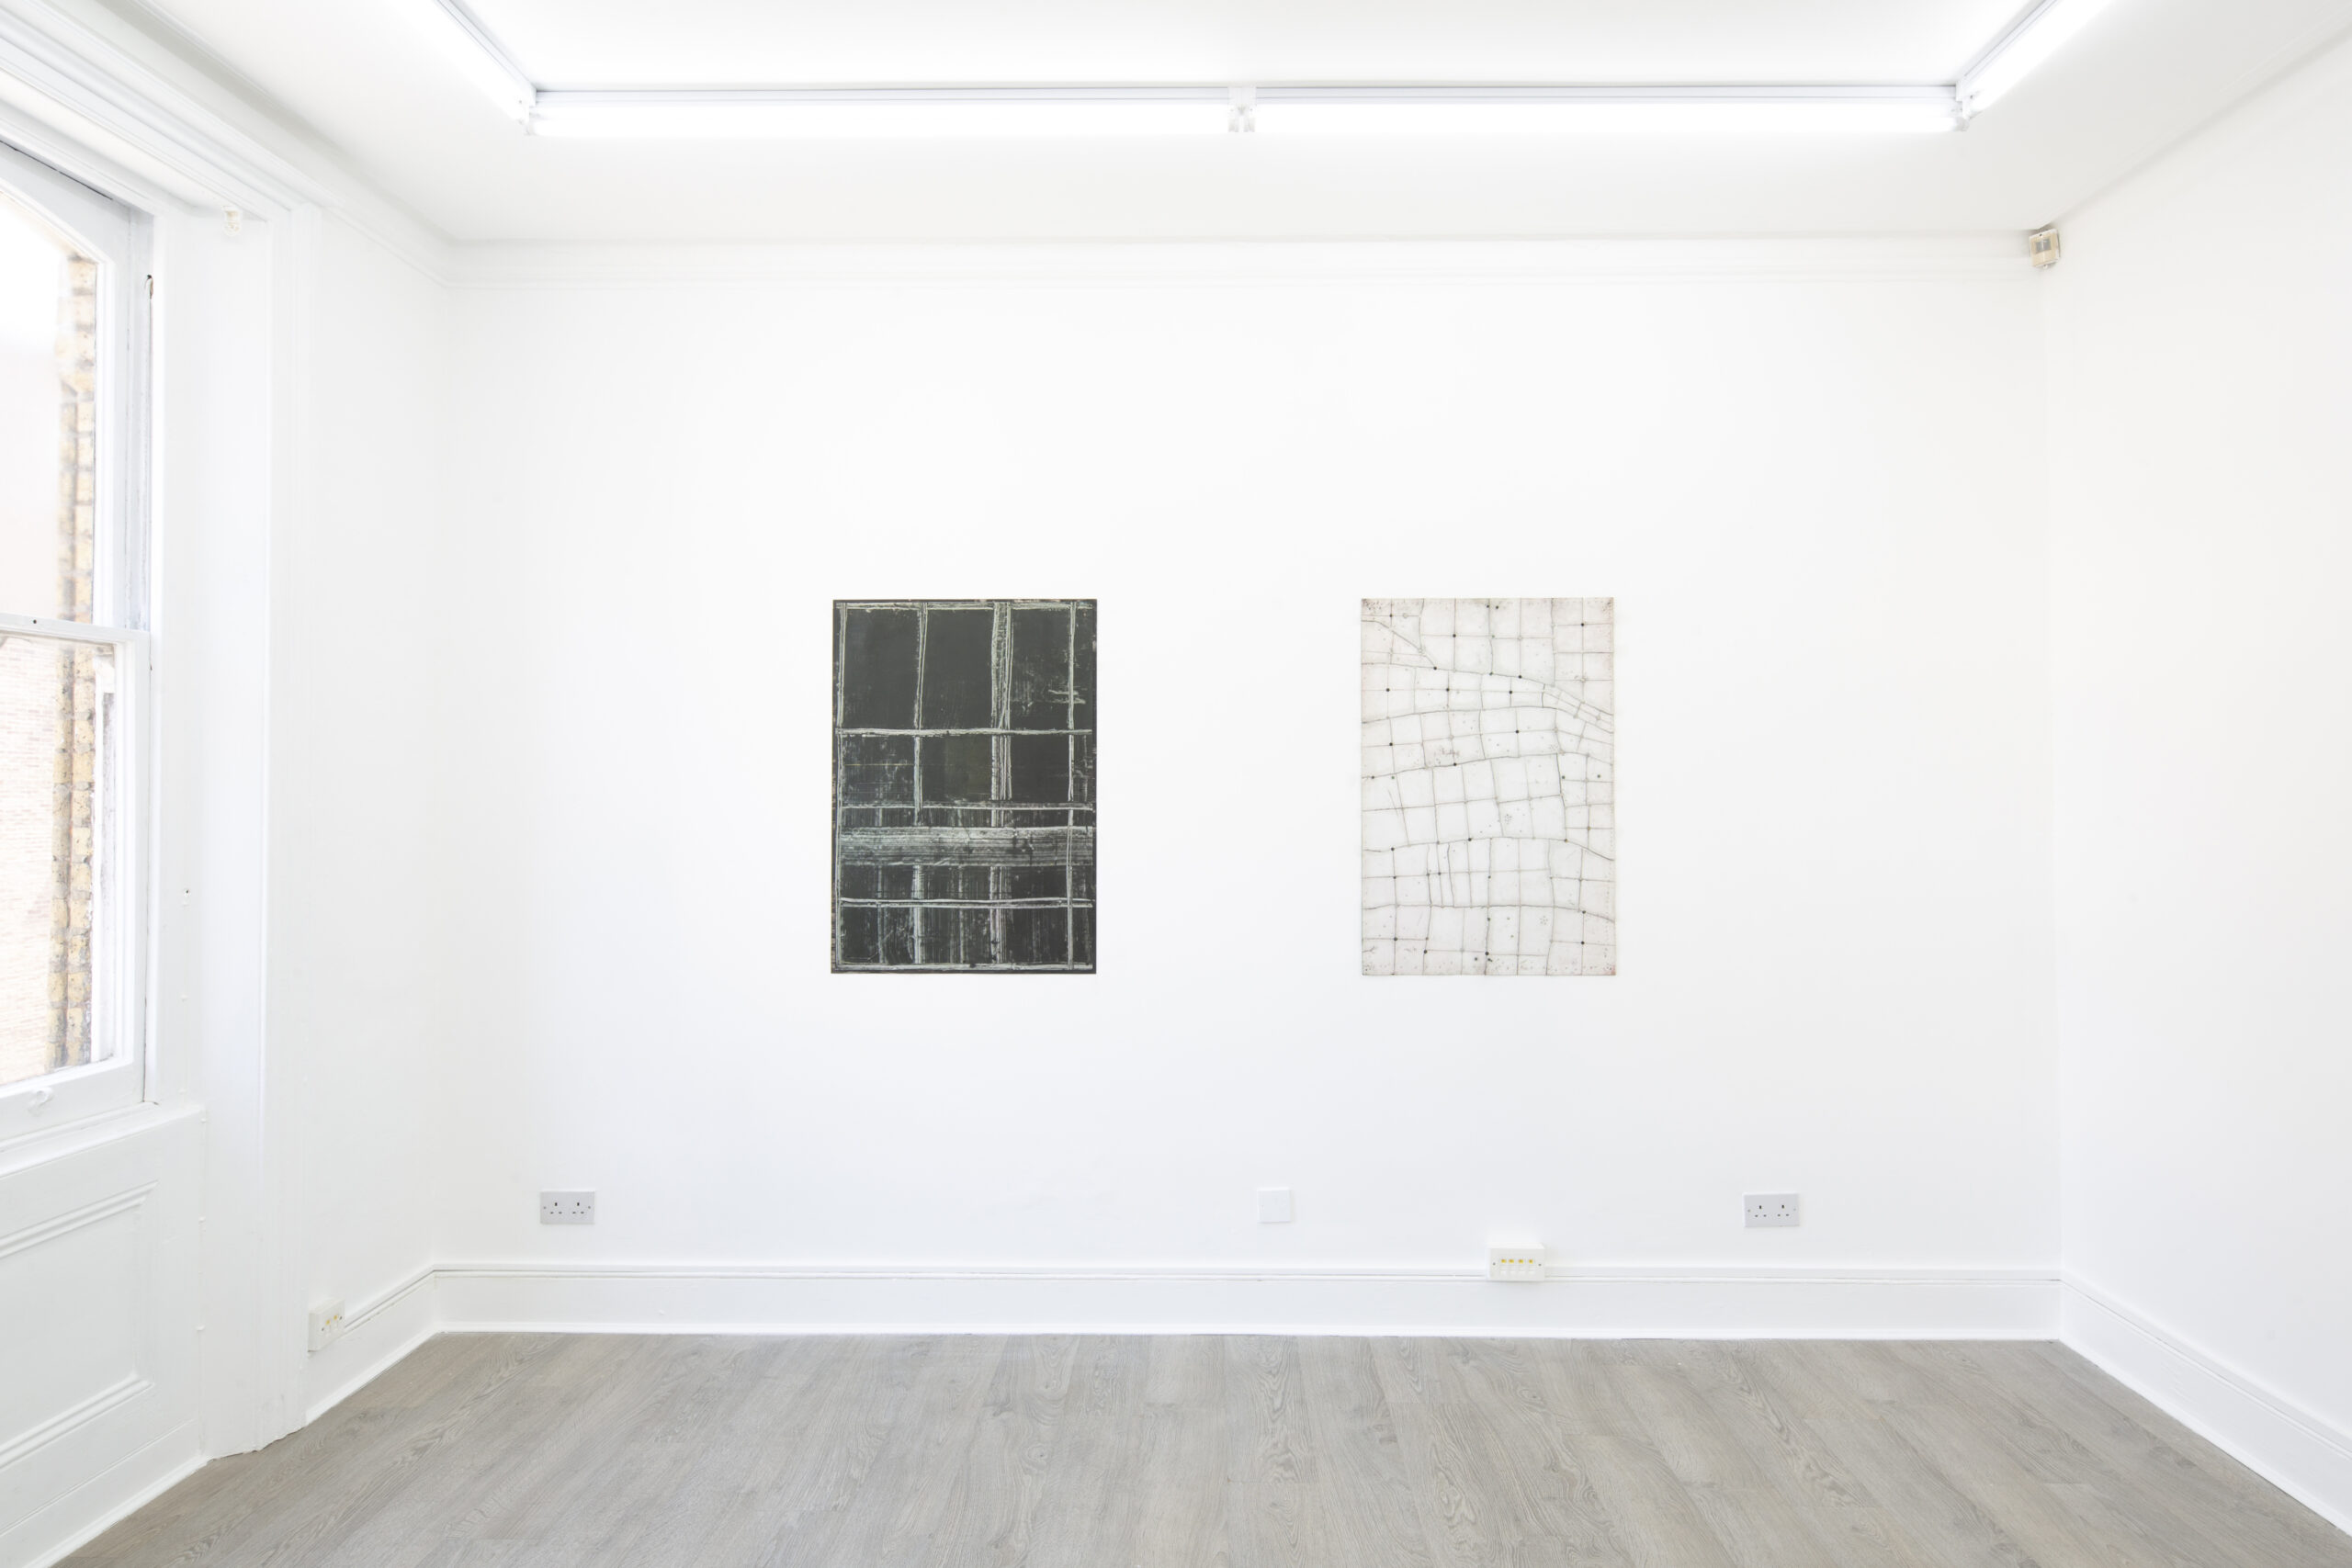 Exhibition view: Anna Paterson 'Hearts' 2022 at Lungley Gallery, London